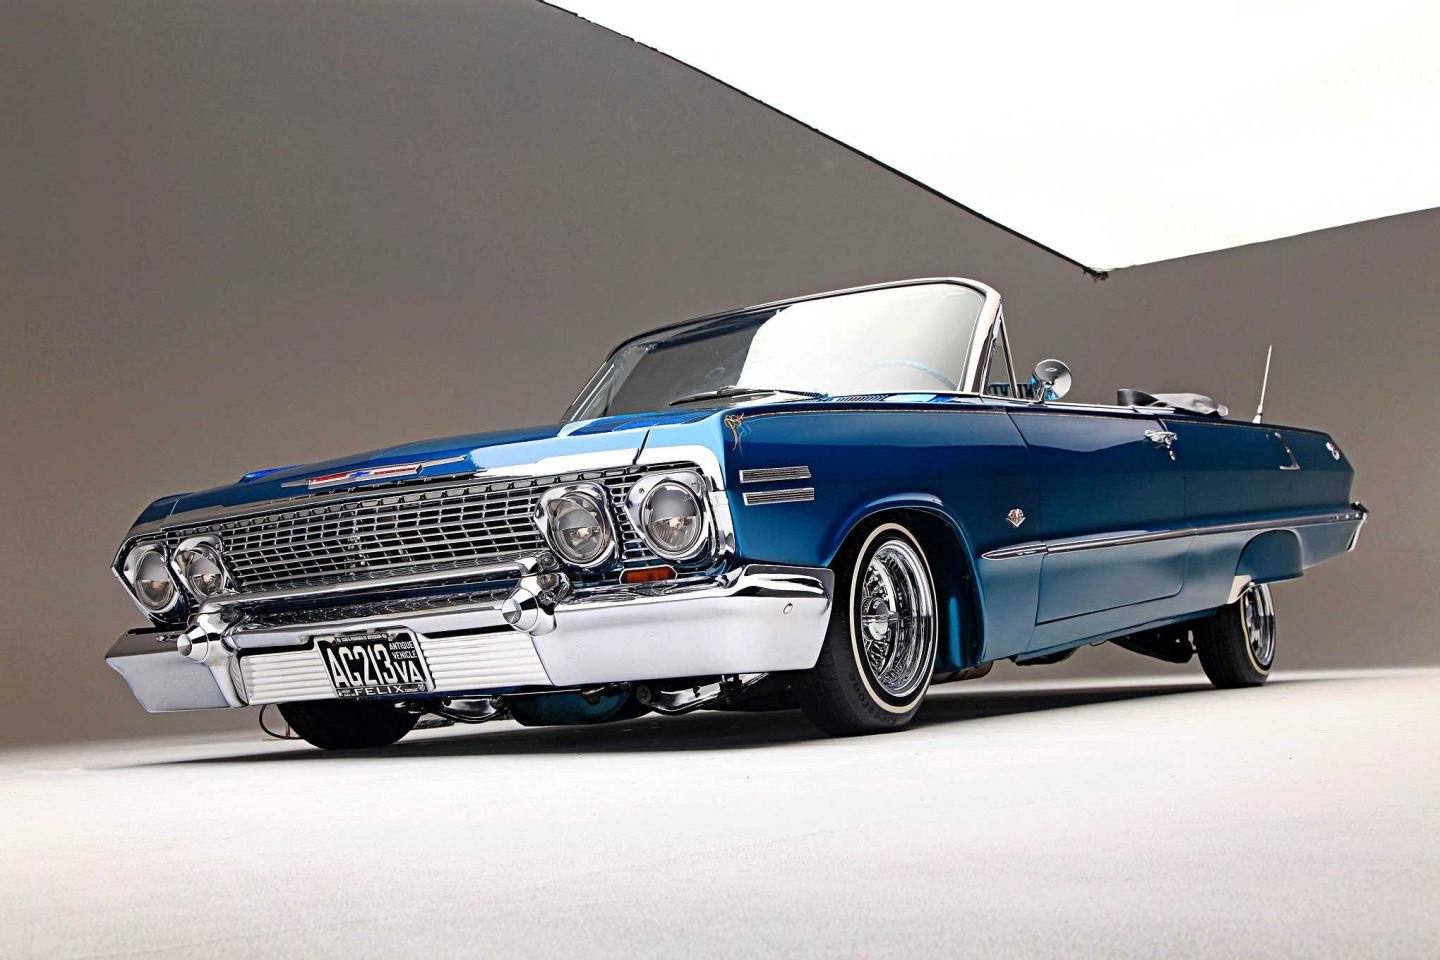 Best Chevrolet Impala wallpaper ID:237570 for High Resolution hd 1440x960 PC